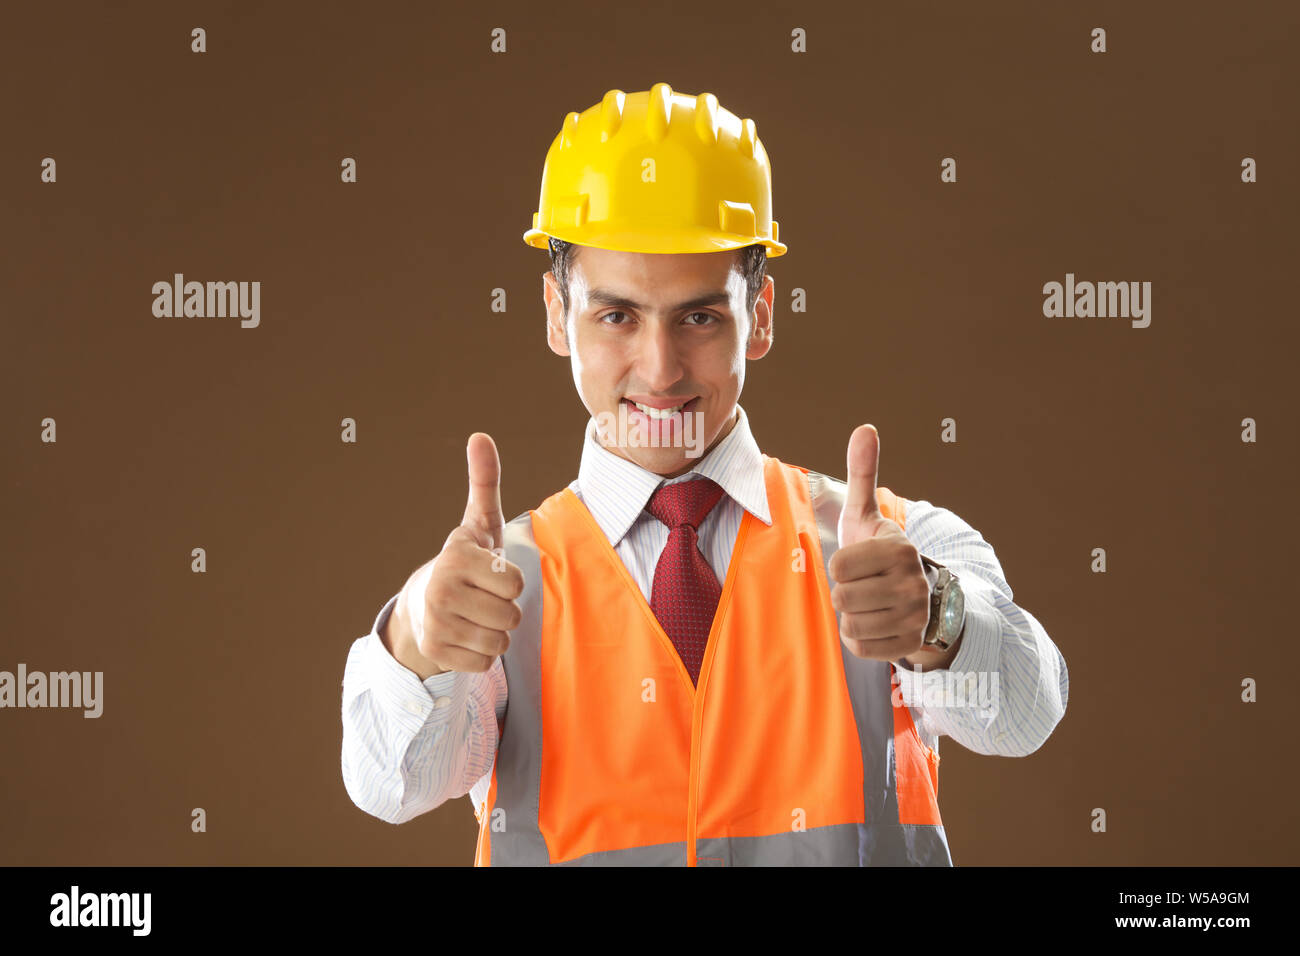 Portrait of a male architect showing thumbs up sign and smiling Stock Photo